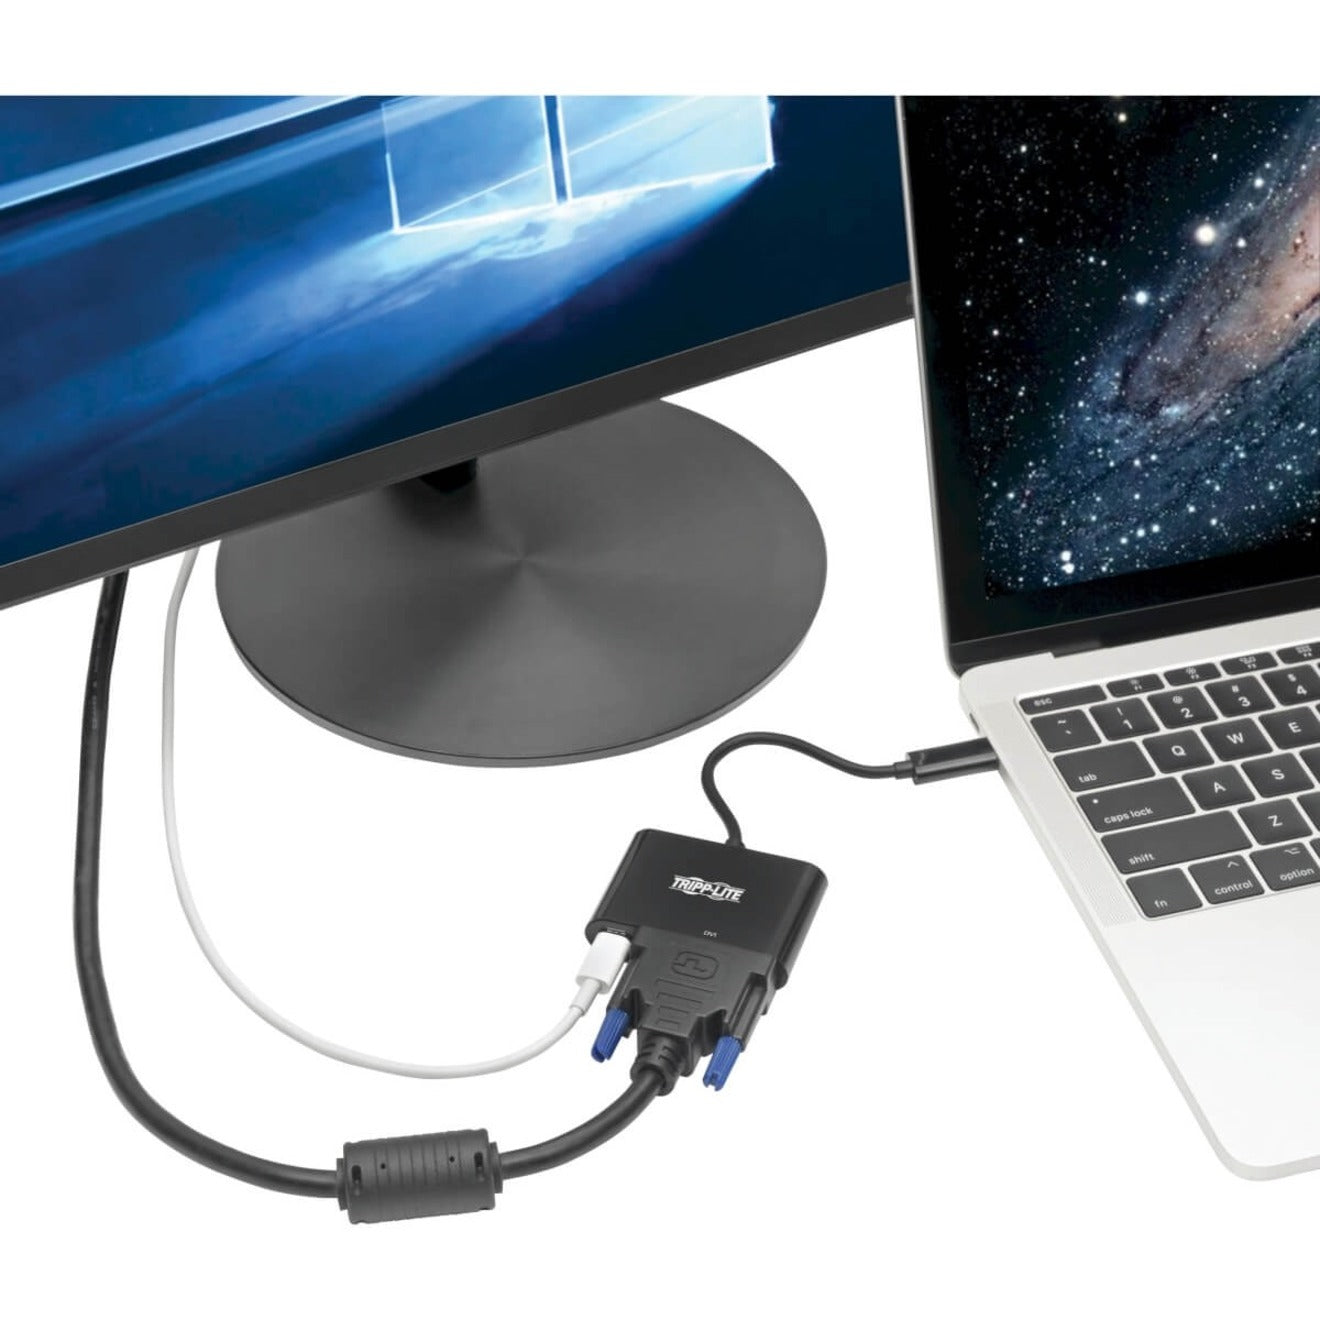 USB-C to DVI Adapter with PD Charging - USB 3.1, Thunderbolt 3, 1080p, Black [Discontinued]